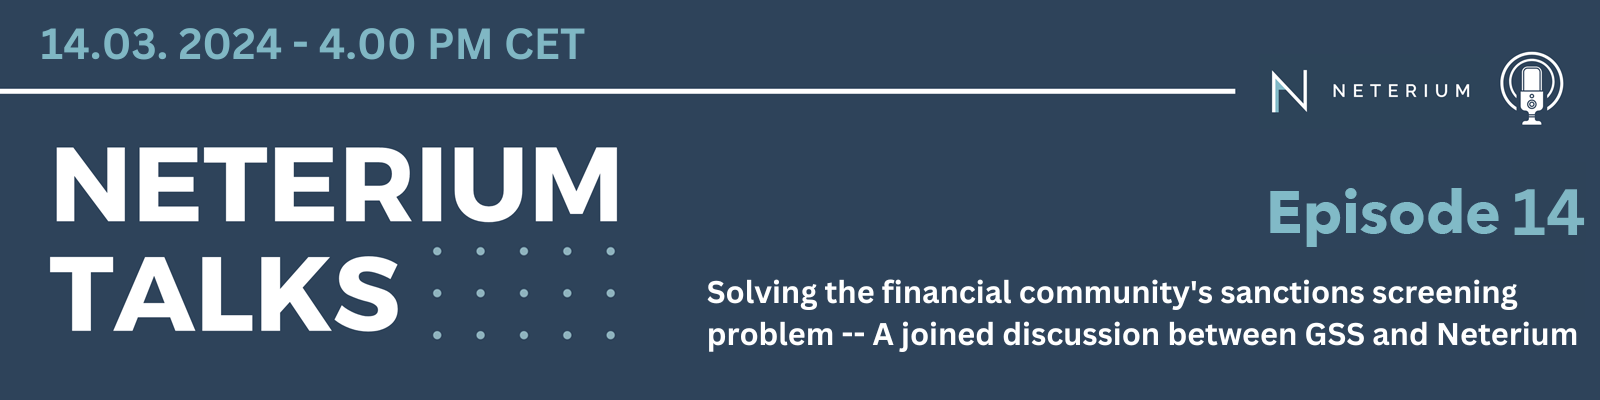 Episode 14: Solving the financial community's sanctions screening problem - A joined conversation with Neterium and GSS